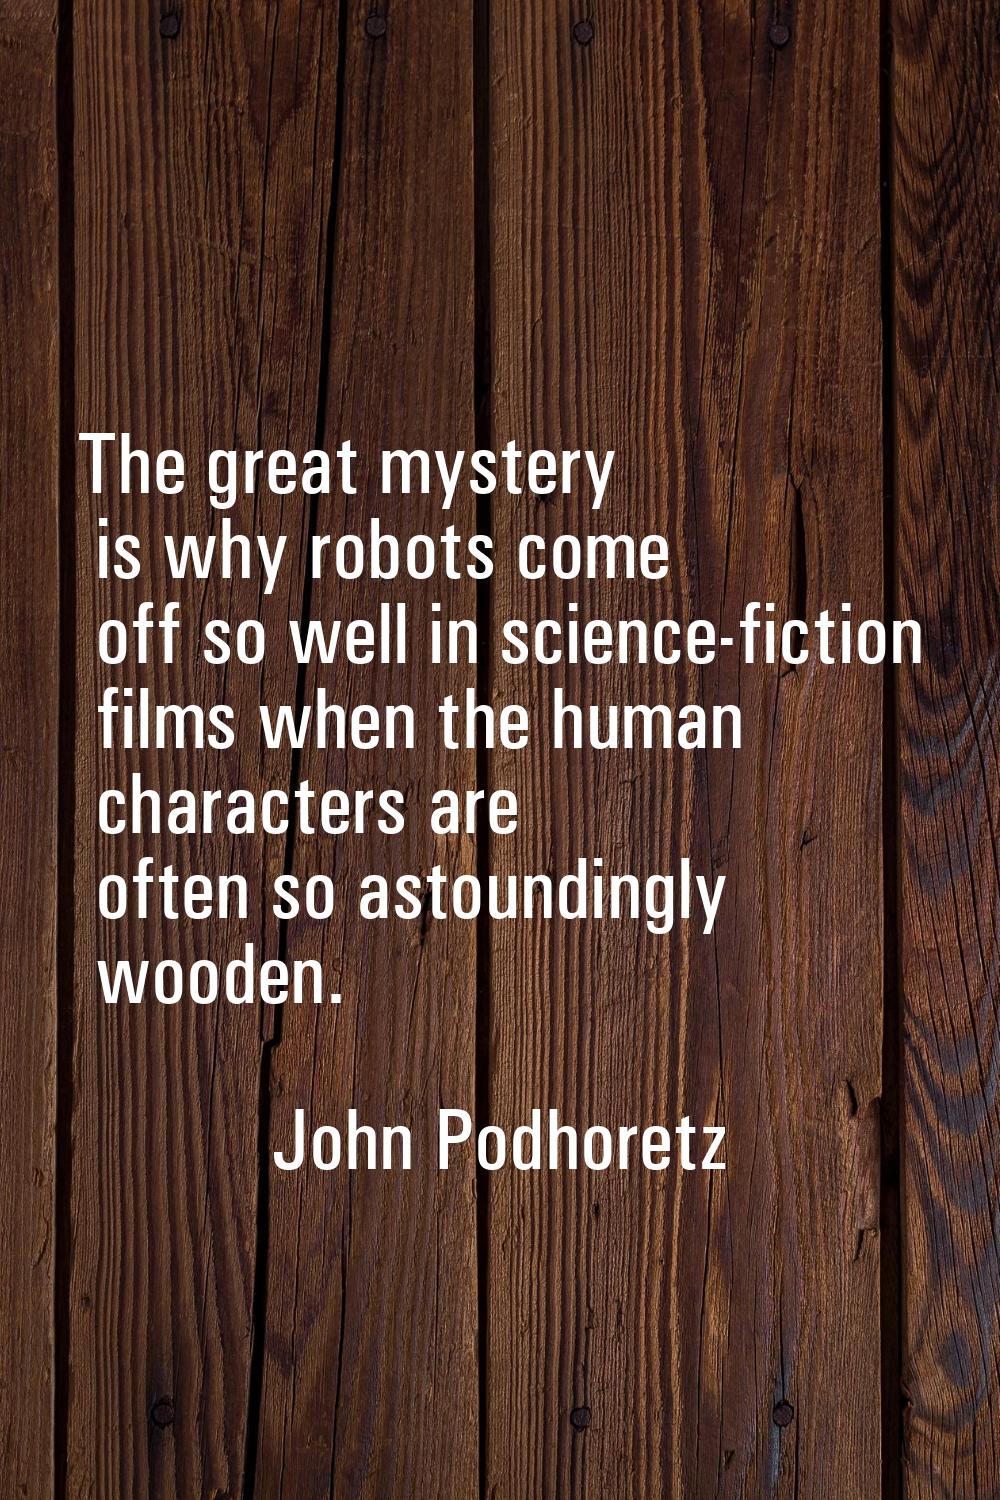 The great mystery is why robots come off so well in science-fiction films when the human characters